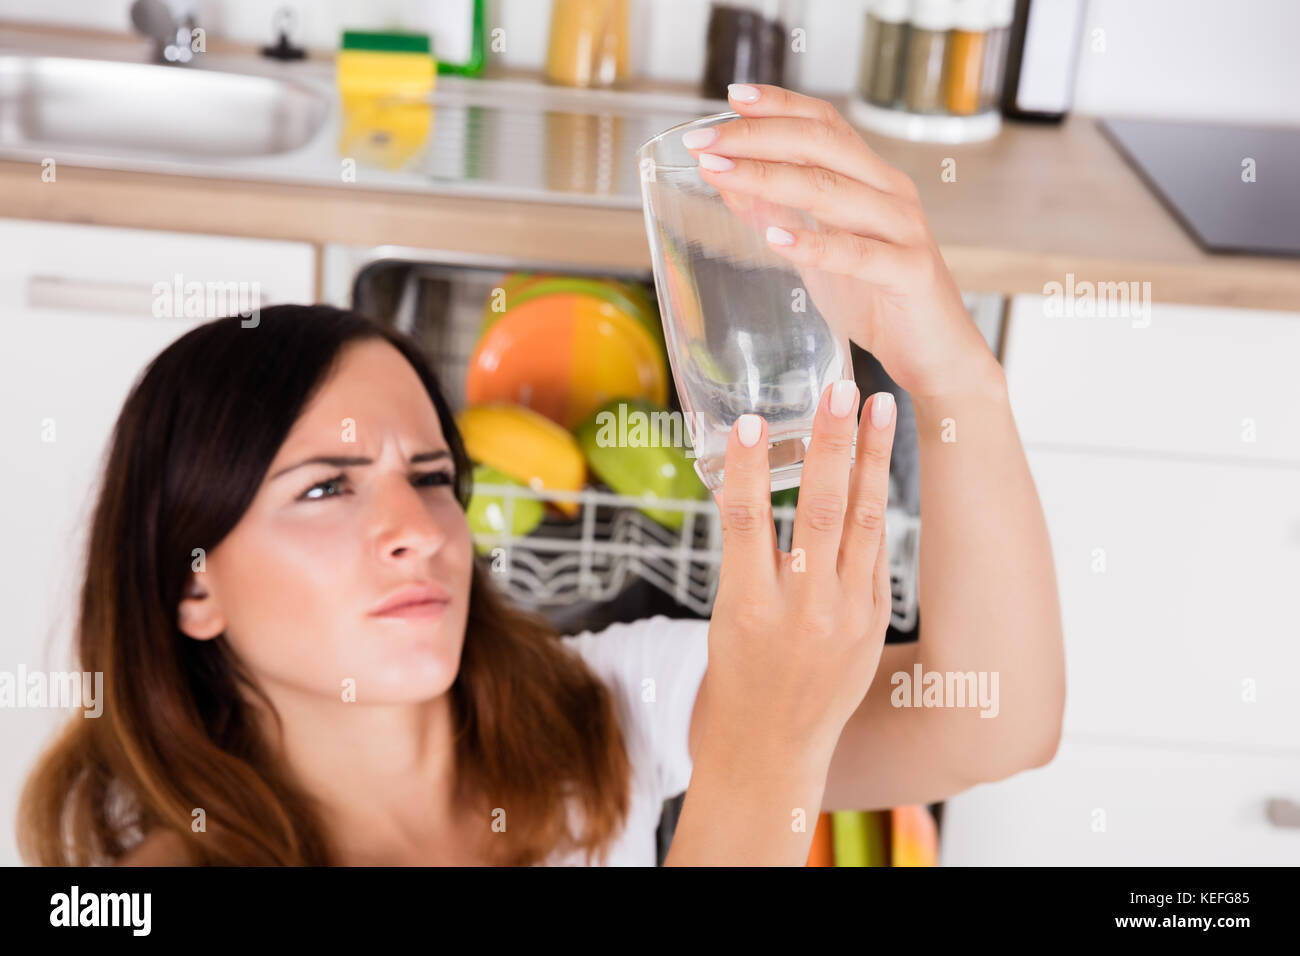 High Angle View Of Young Woman Looking At Clean Glass In Kitchen Stock Photo